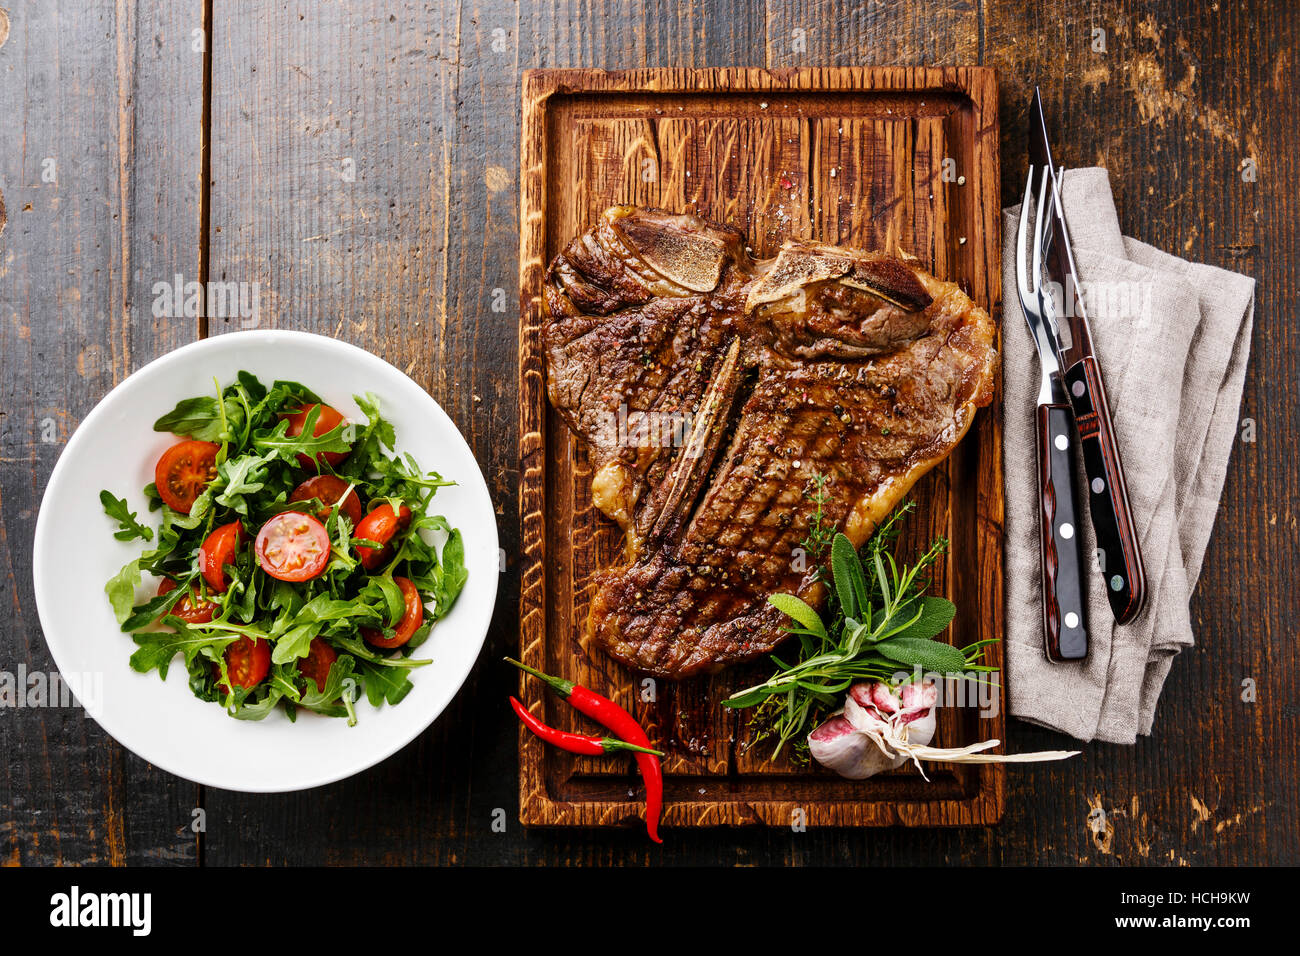 Grilled T-Bone Steak with Salad with Cherry tomatoes and Arugula on serving board on wooden background Stock Photo